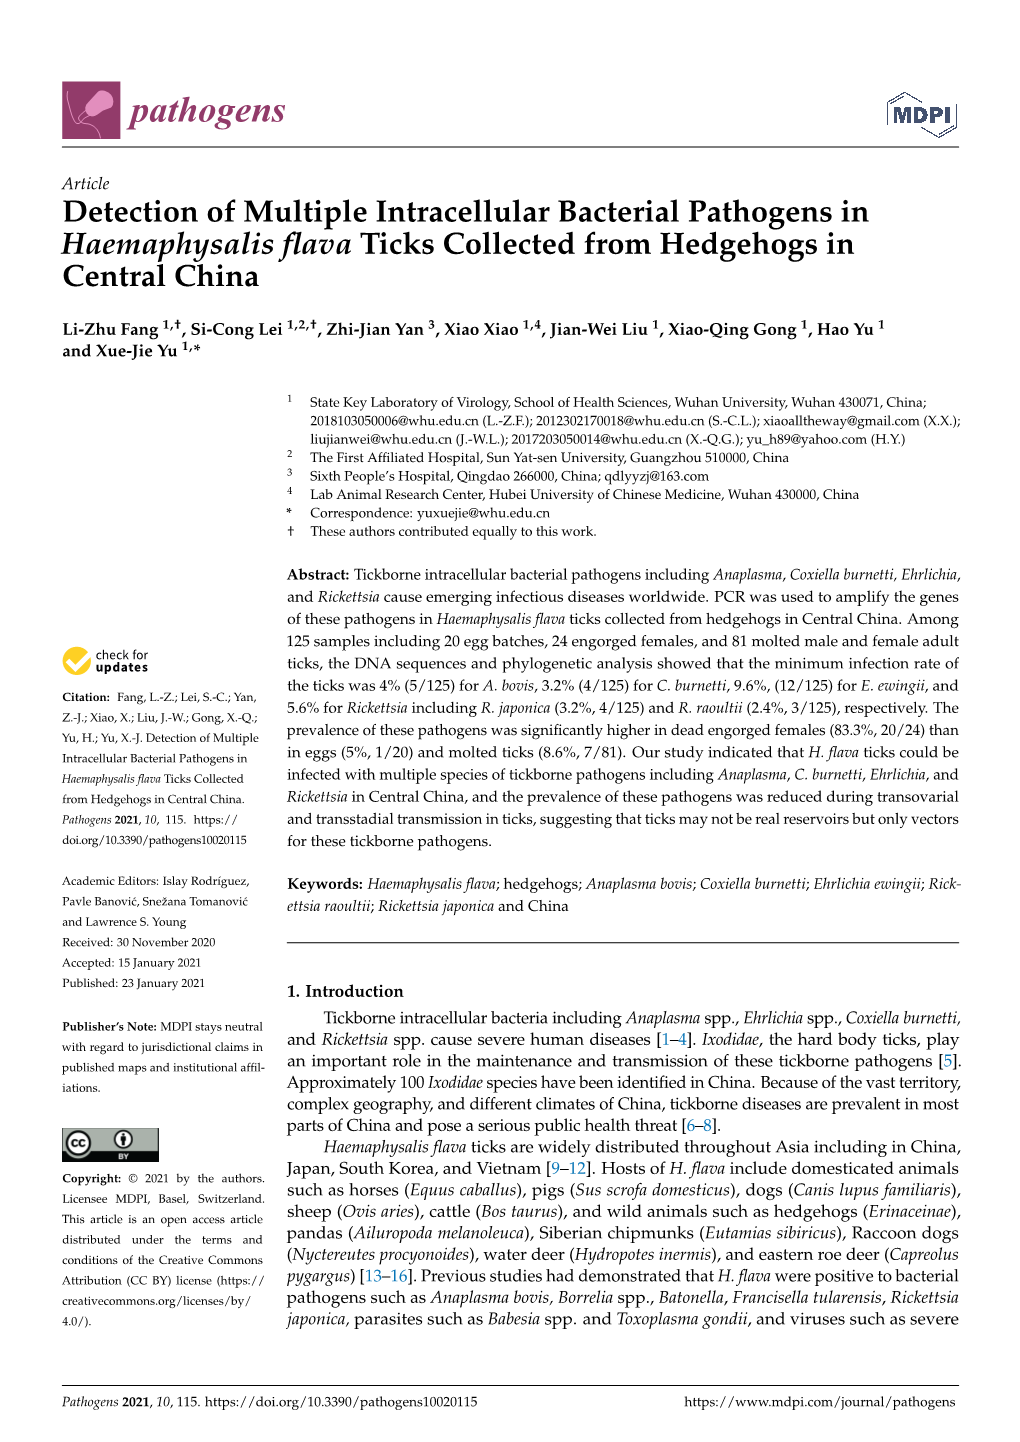 Detection of Multiple Intracellular Bacterial Pathogens in Haemaphysalis Flava Ticks Collected from Hedgehogs in Central China